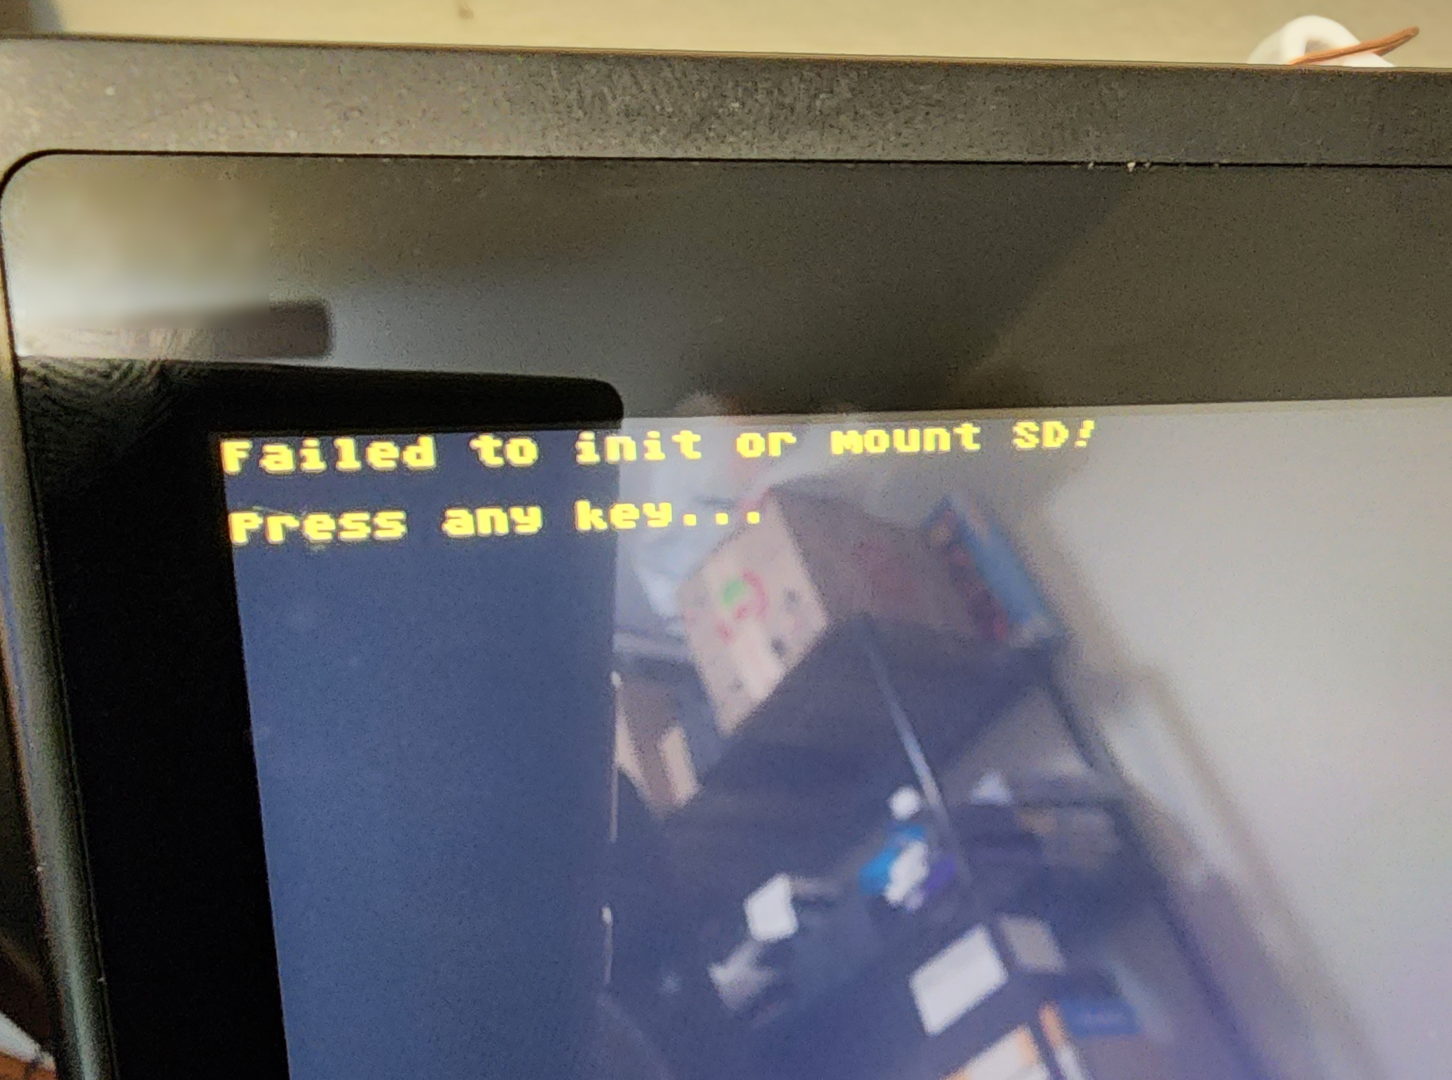 closeup showing the "failed to init or mount sd" on the nintendo switch